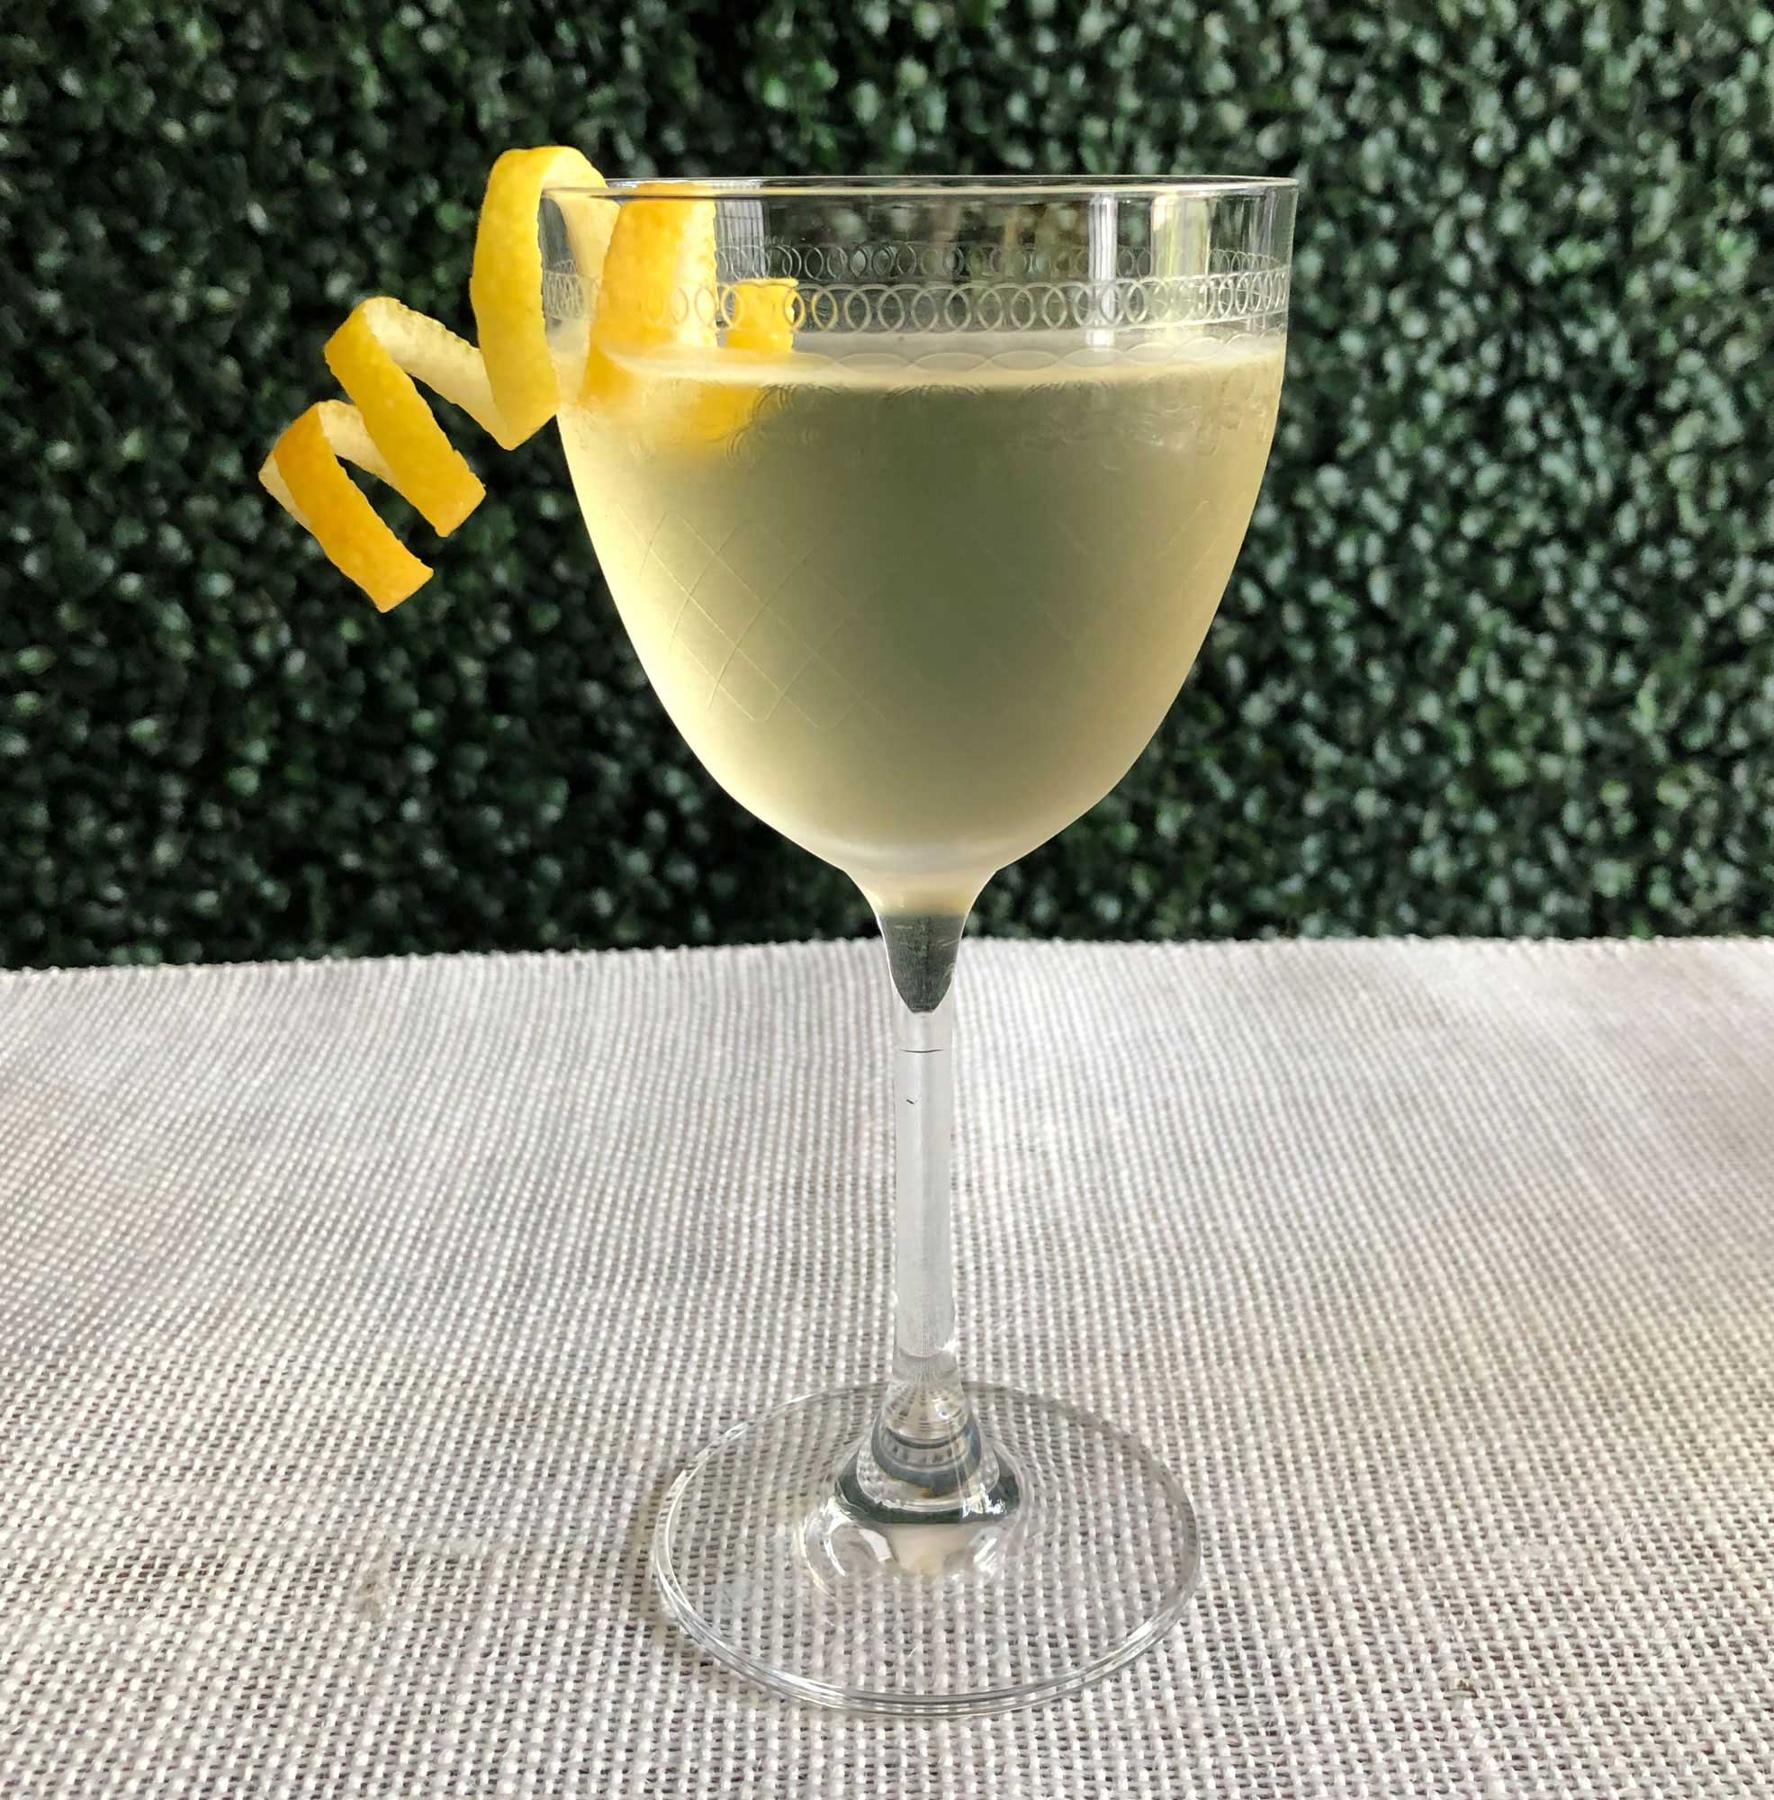 An example of the Parfait Parfait, the mixed drink (drink), by Kelly O’Hare, Austin, TX, featuring Hayman’s London Dry Gin, Comoz Blanc Vermouth de Chambèry, Mattei Cap Corse Blanc Quinquina, and lemon twist; photo by Lee Edwards